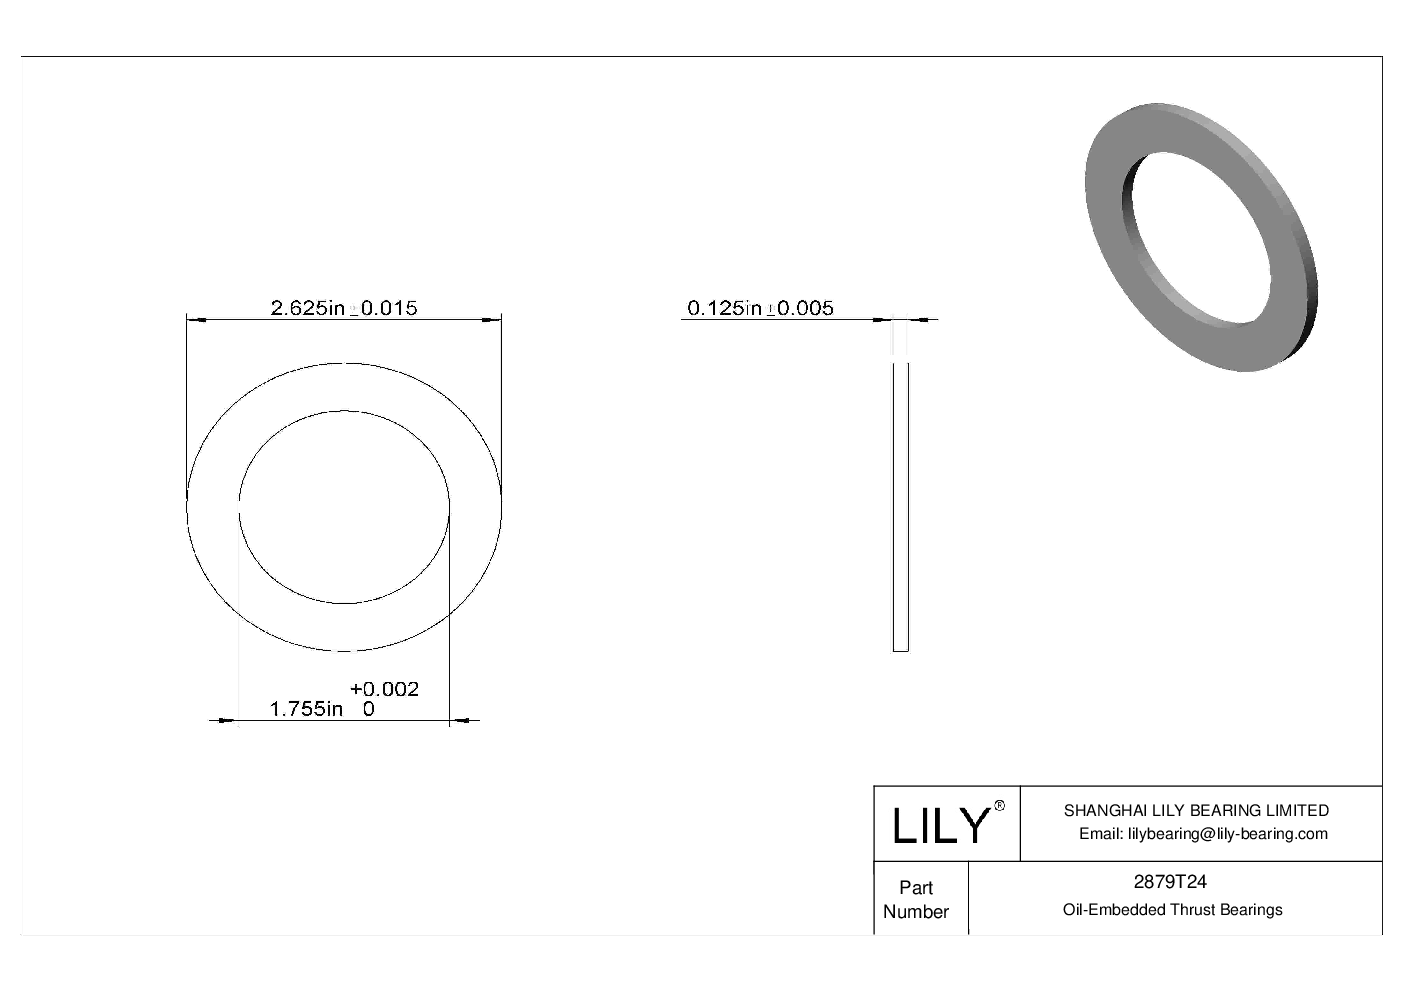 CIHJTCE High-Load Oil-Embedded Thrust Bearings cad drawing